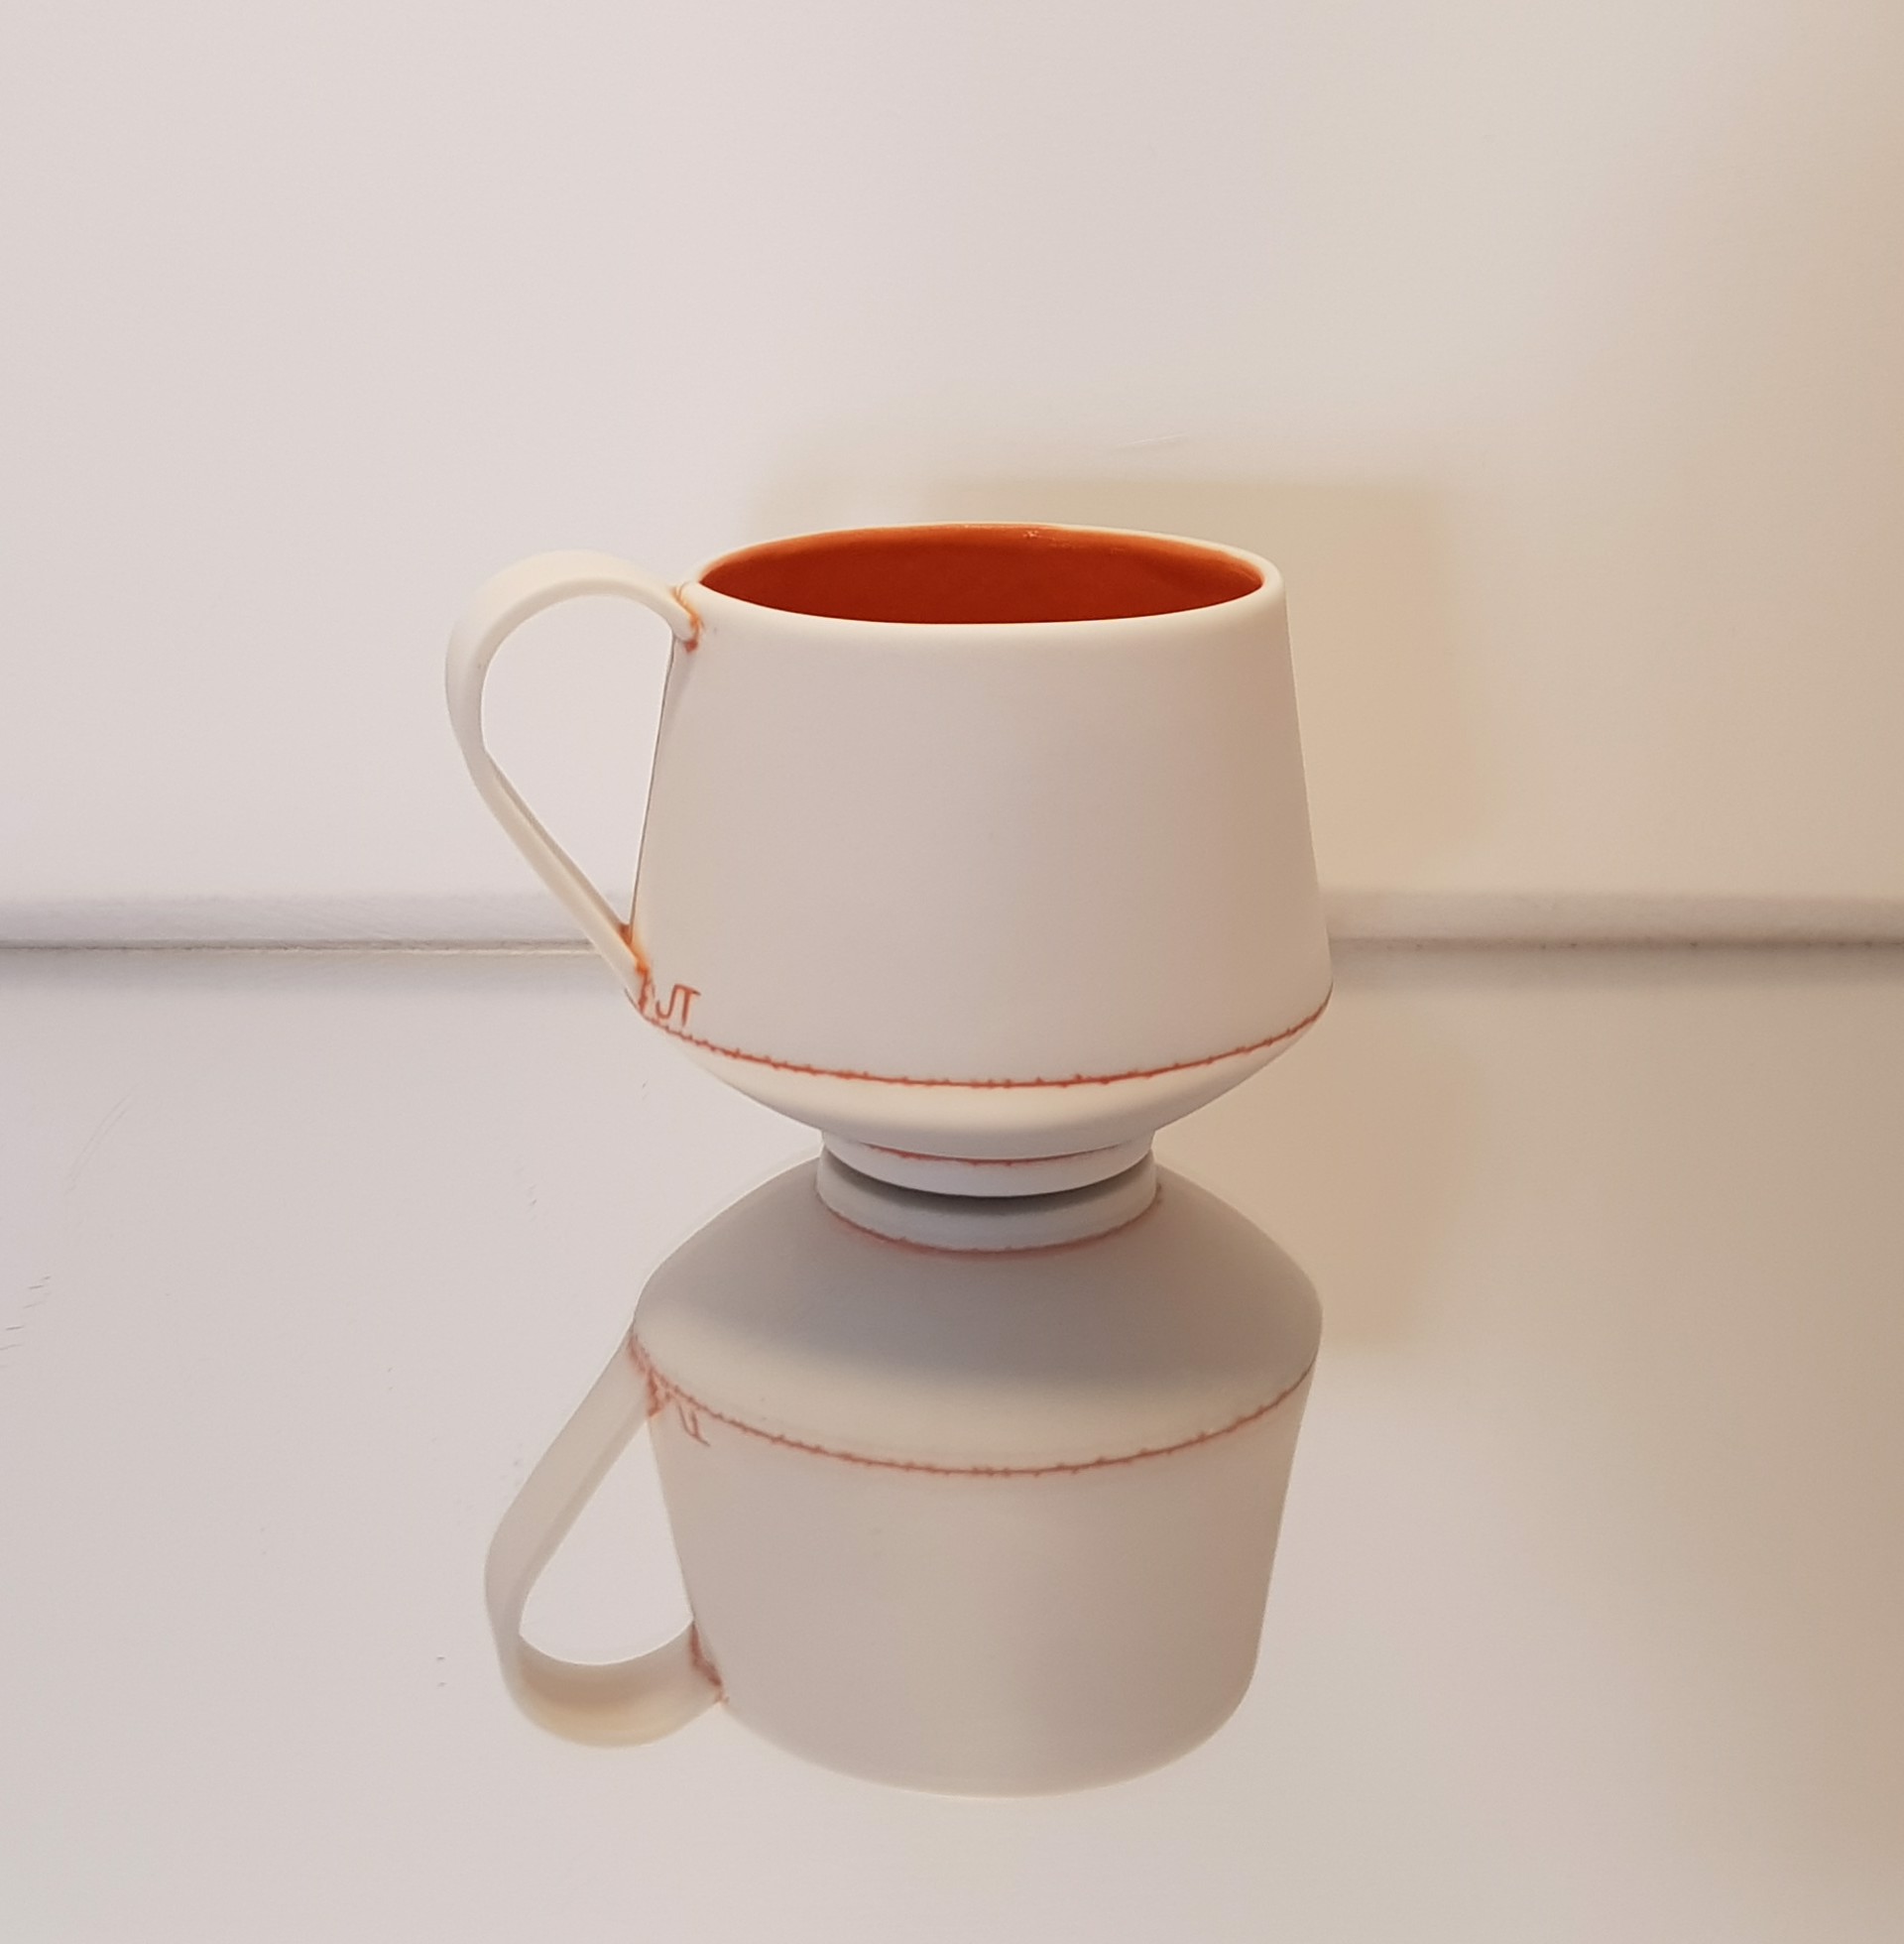 Breakfast Cup Orange by Jessica Thorn